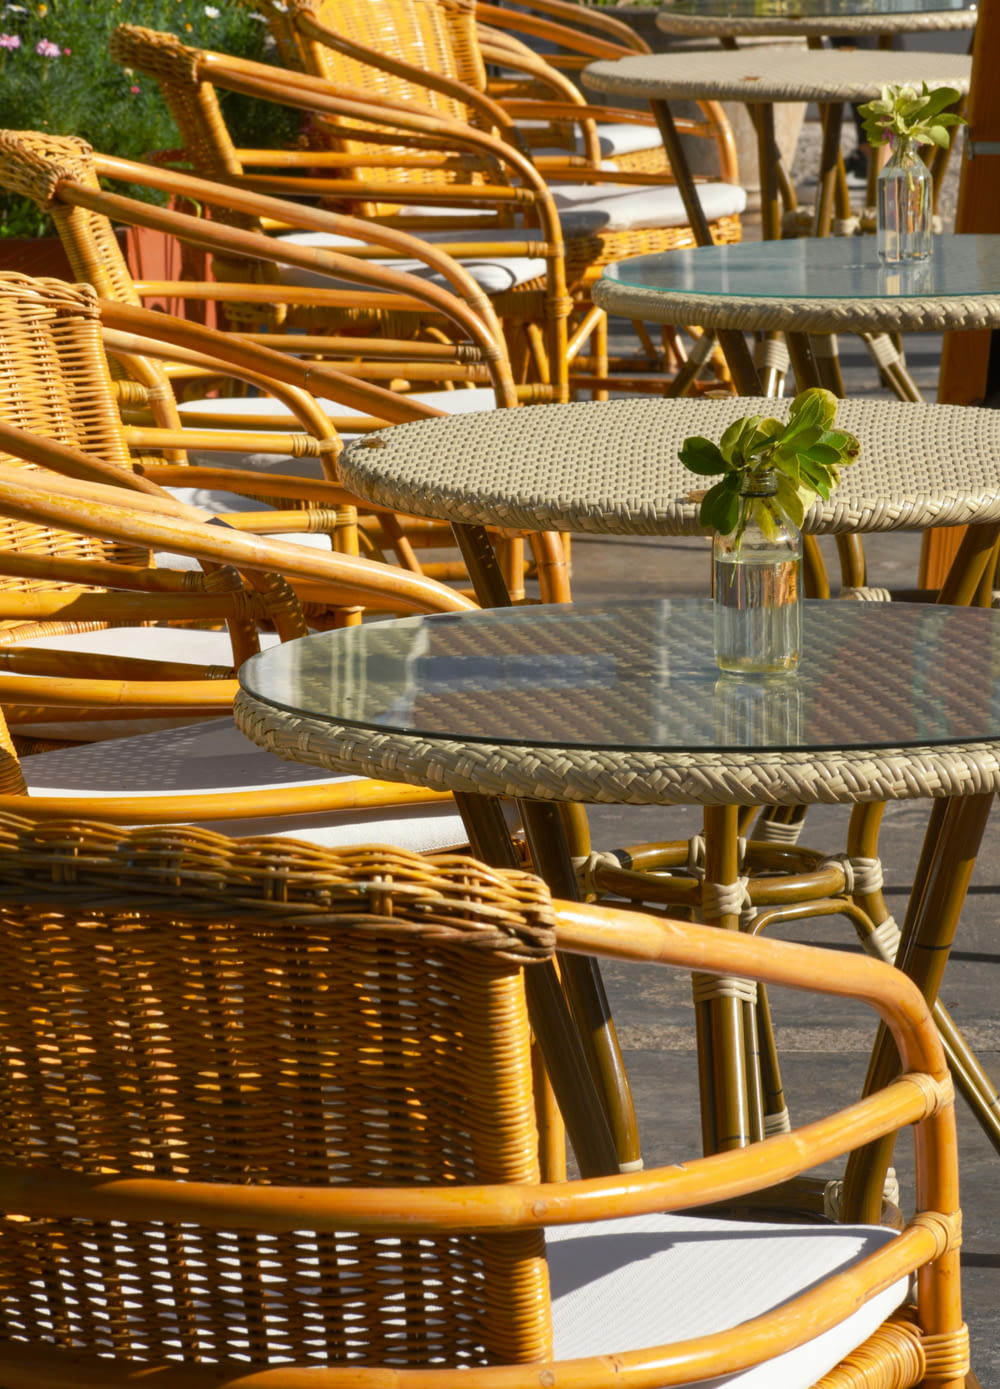 a row of wicker chairs and tables on a patio